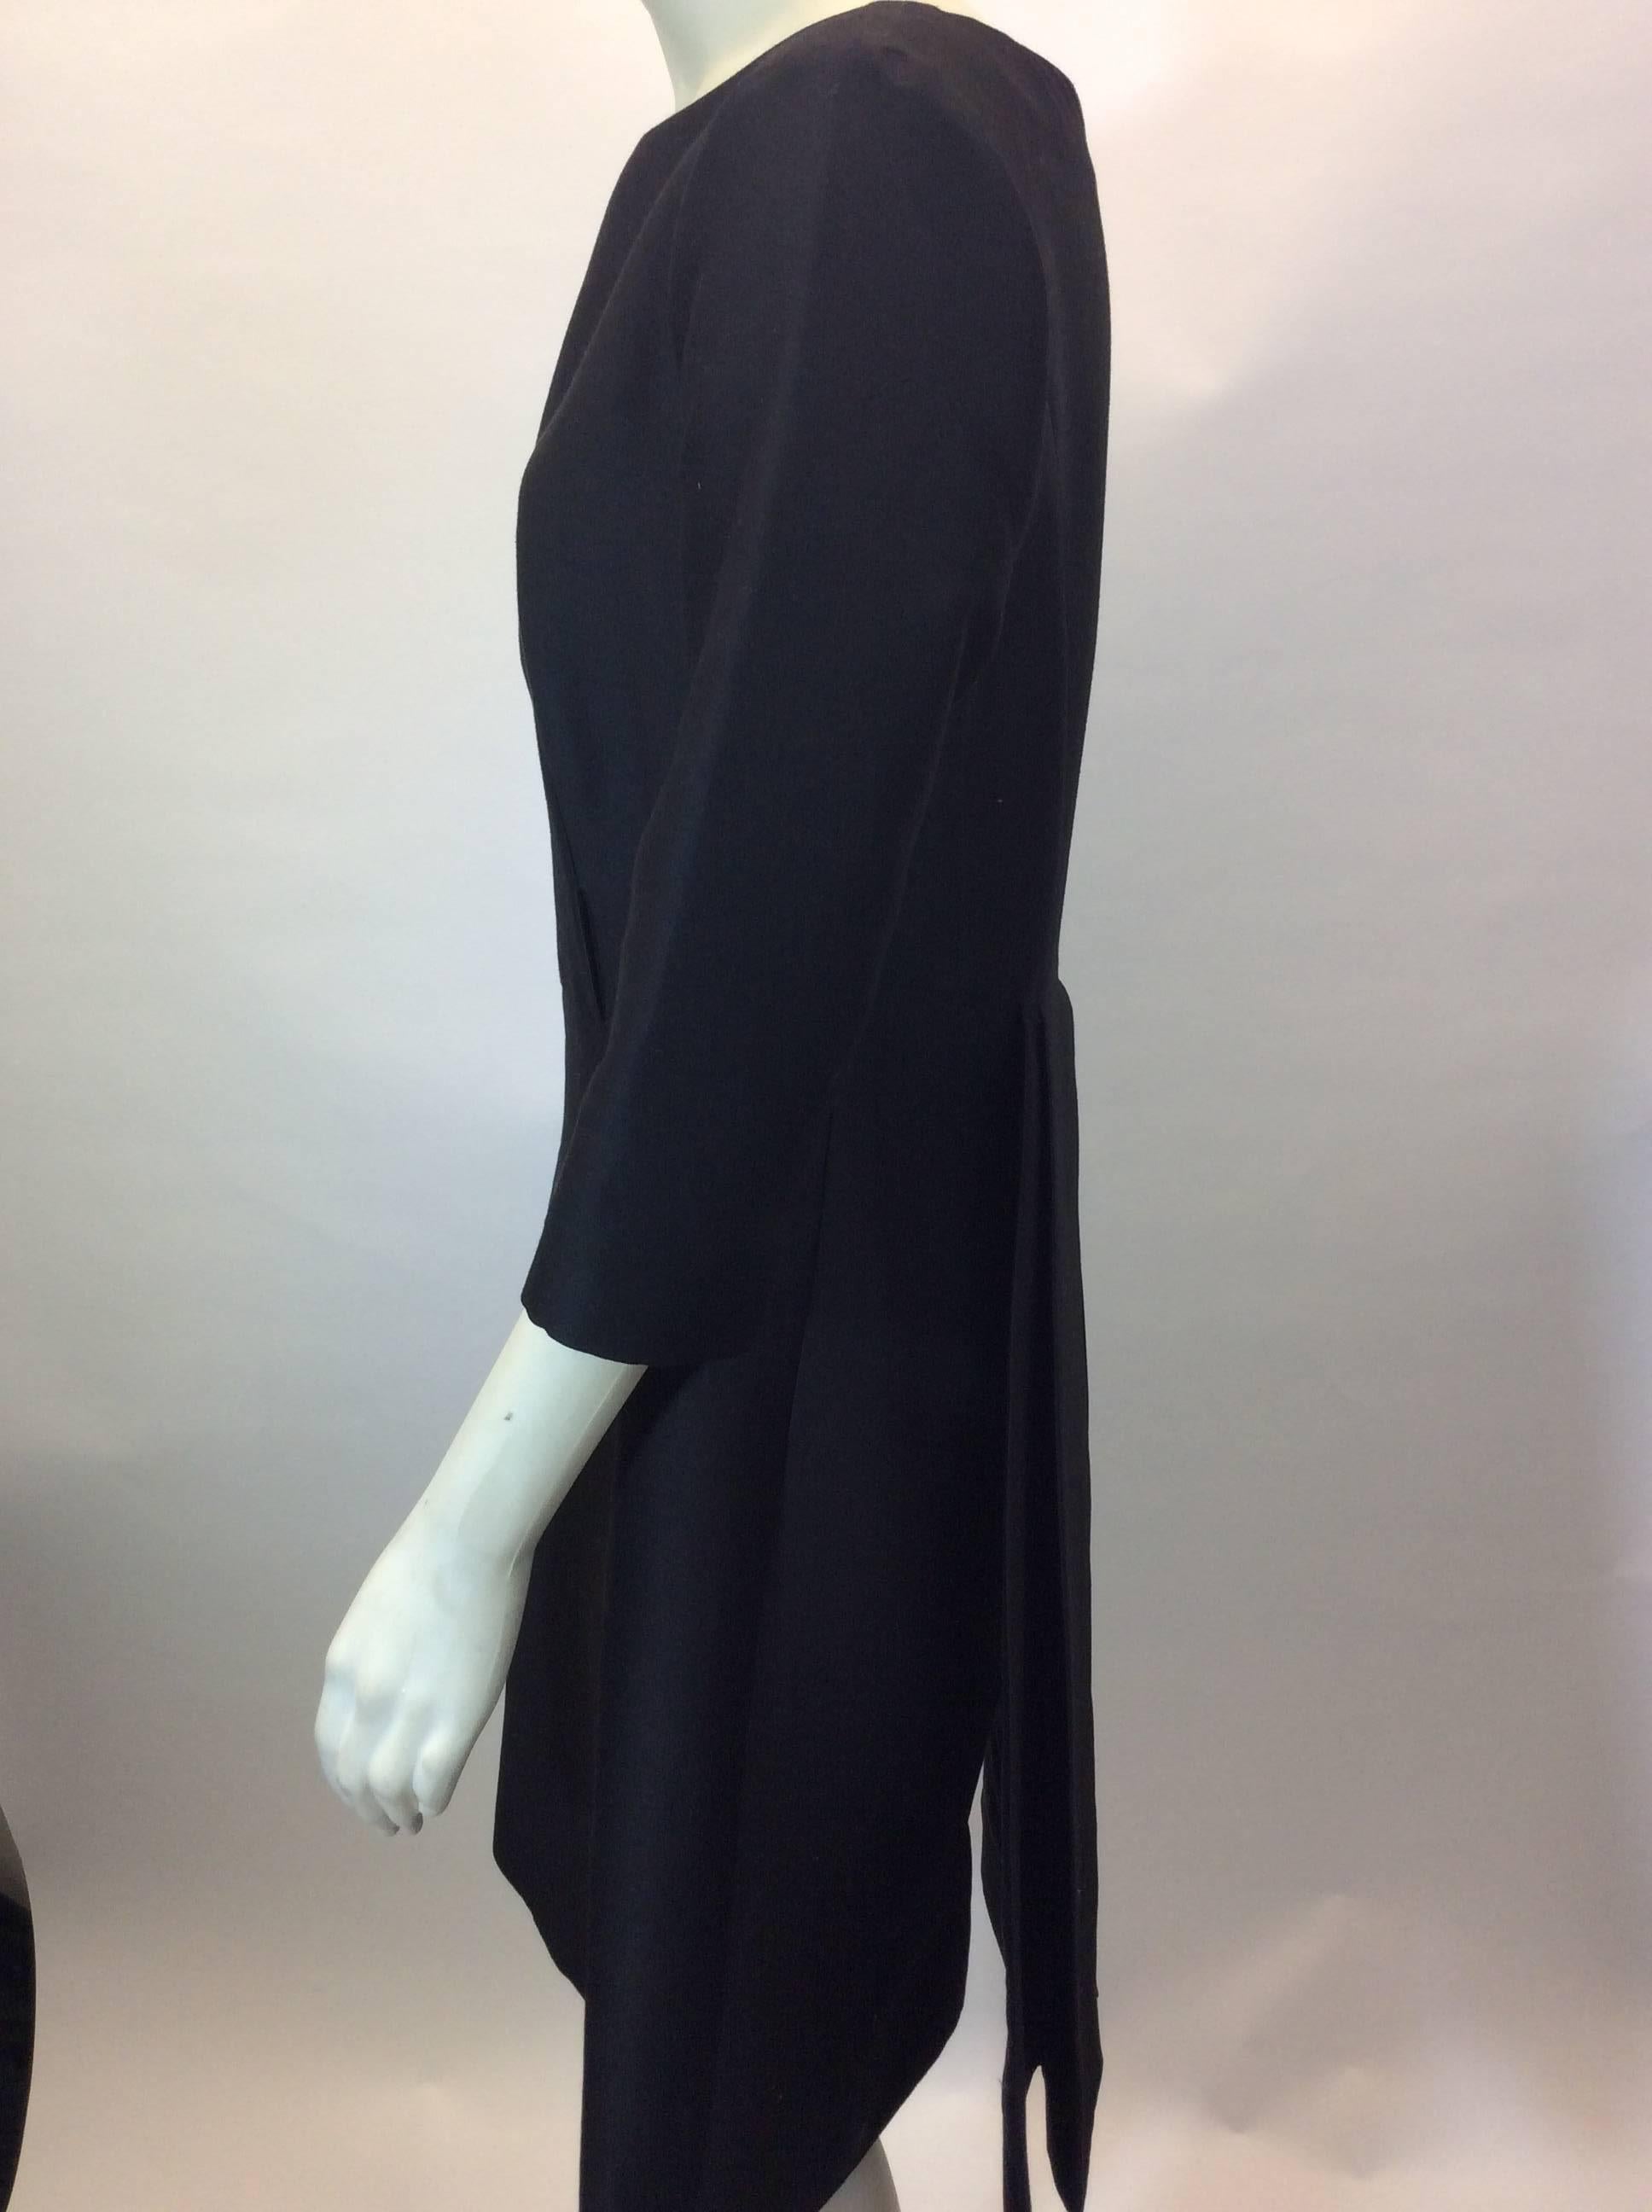 Black Dress with Pleated Back Detail
Center back zipper closure
3/4 length sleeves
Knee length
Back pleated tail detail
Size 40
100% Silk